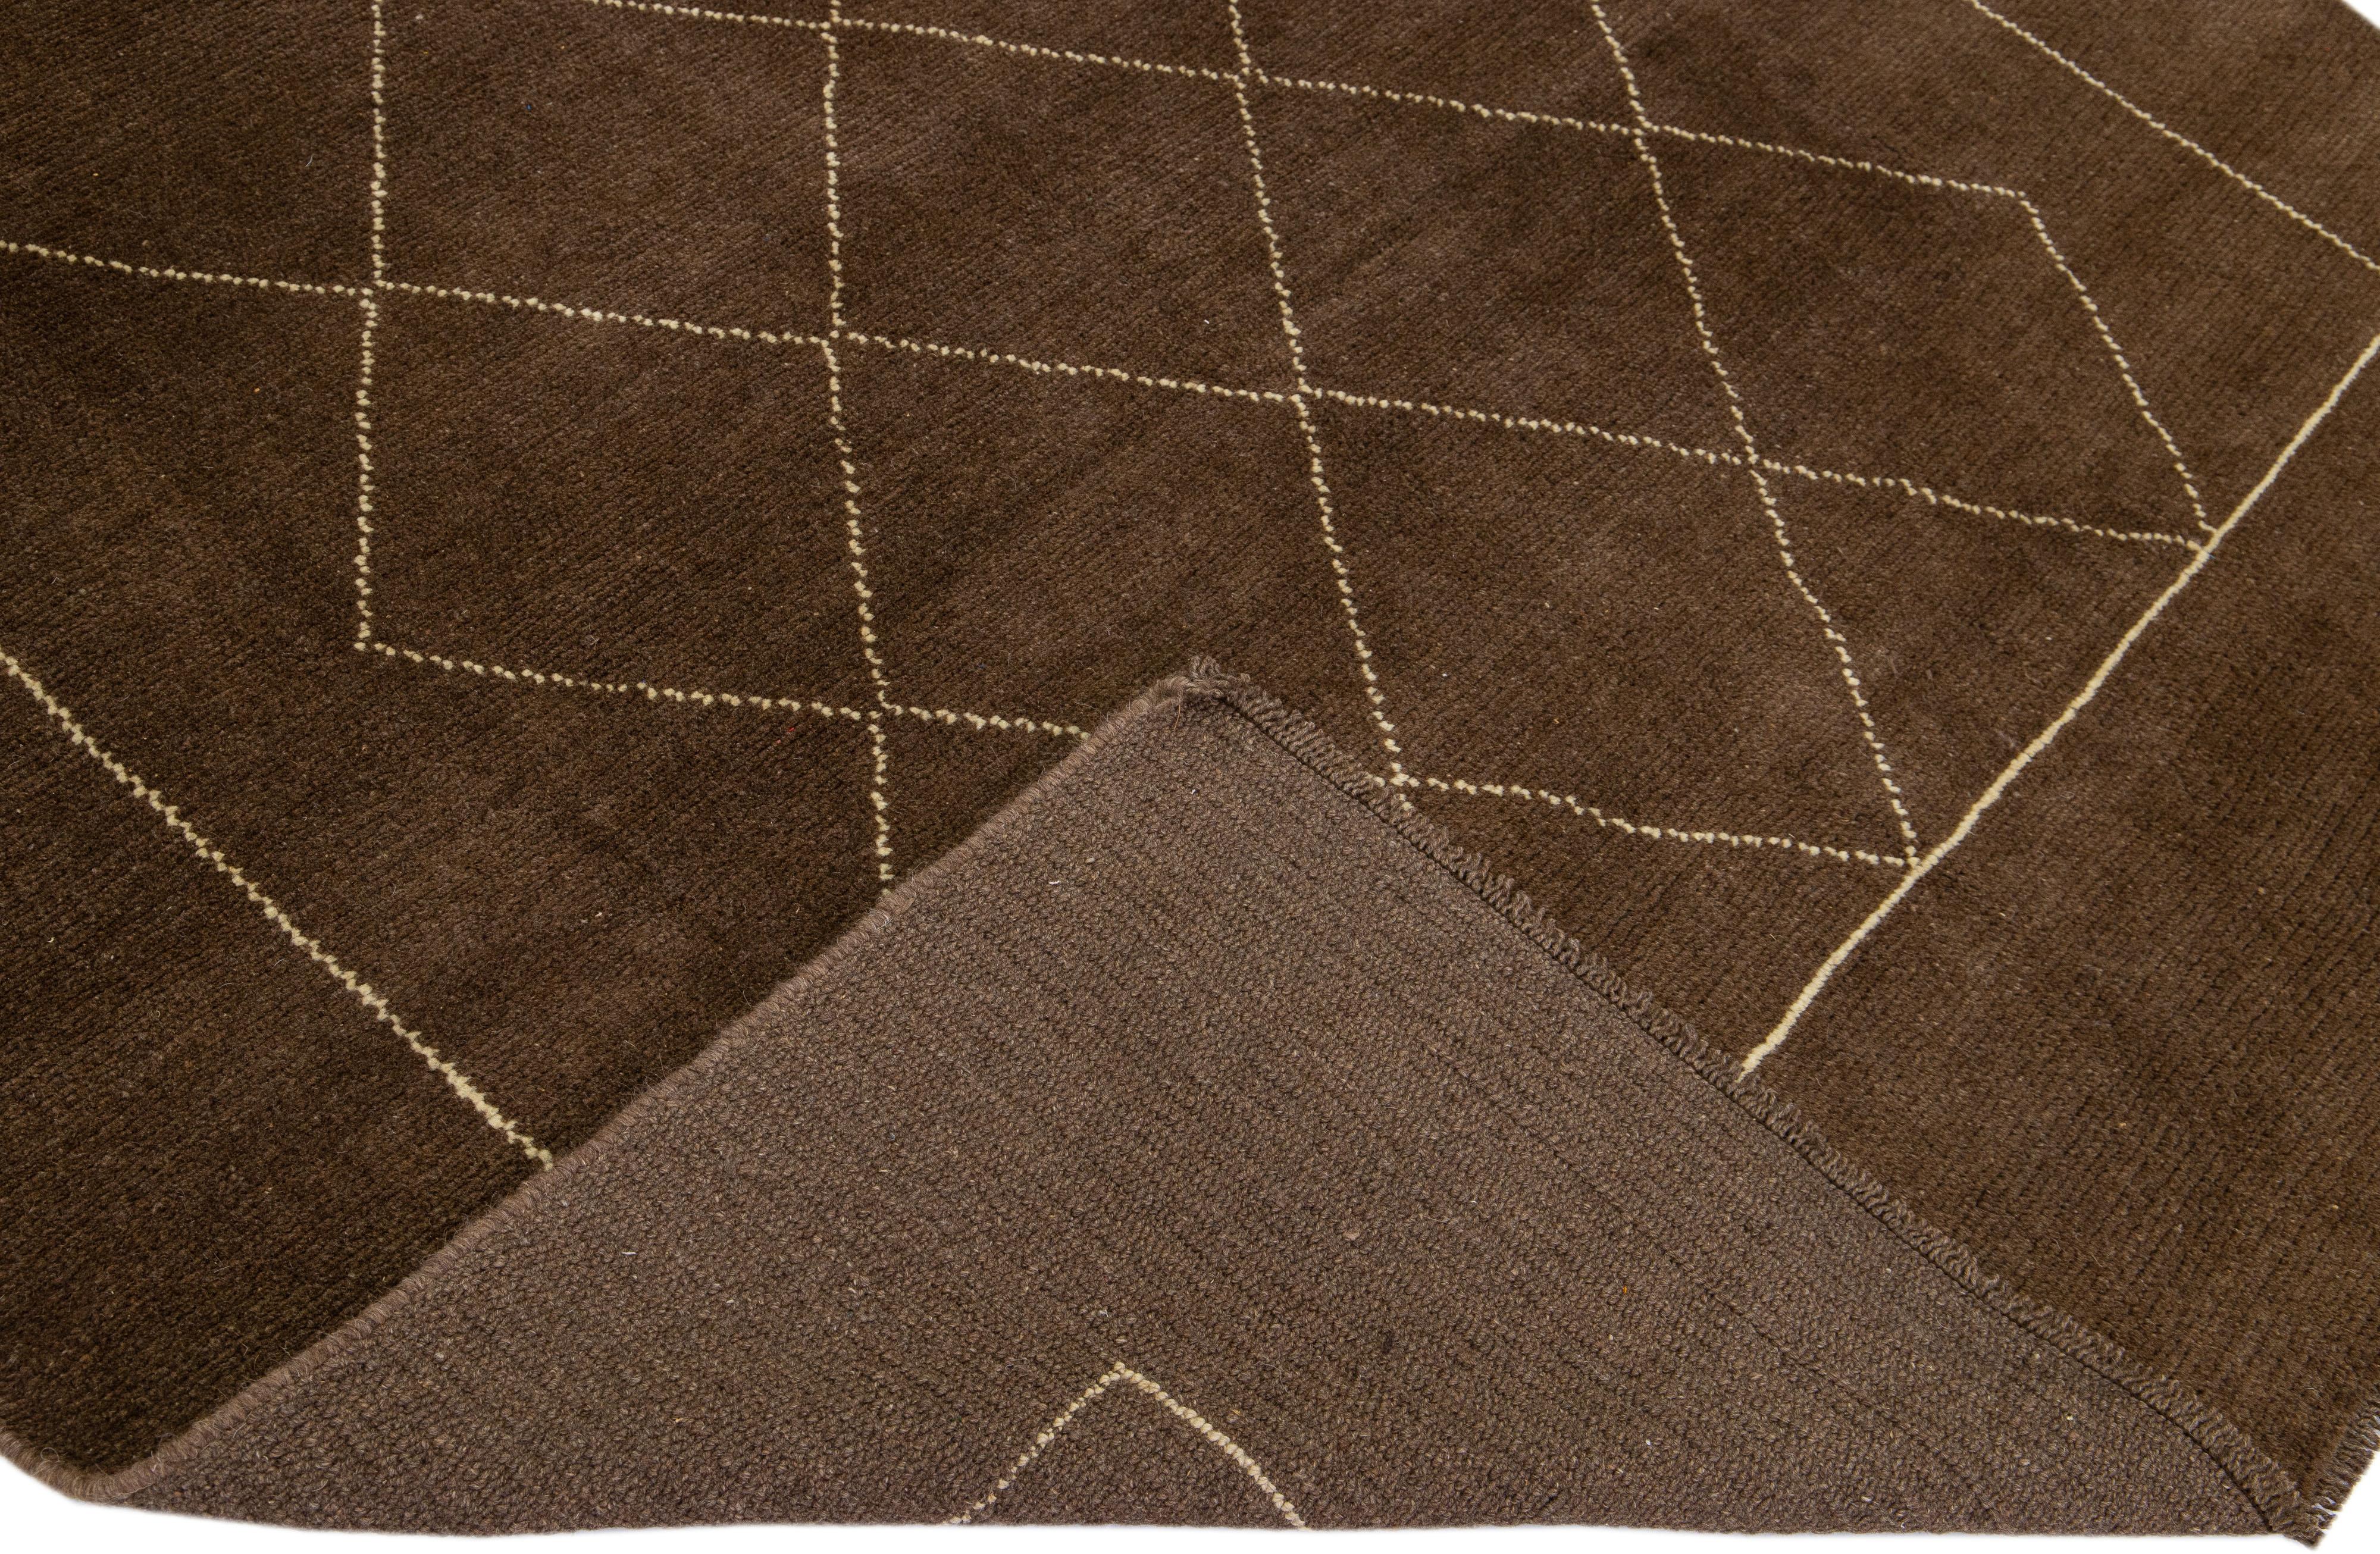 This beautiful Moroccan-style handmade wool rug makes part of our Northwest collection and features a brown color field and beige accents in a gorgeous geometric tribal design.

This rug measures: 6'6